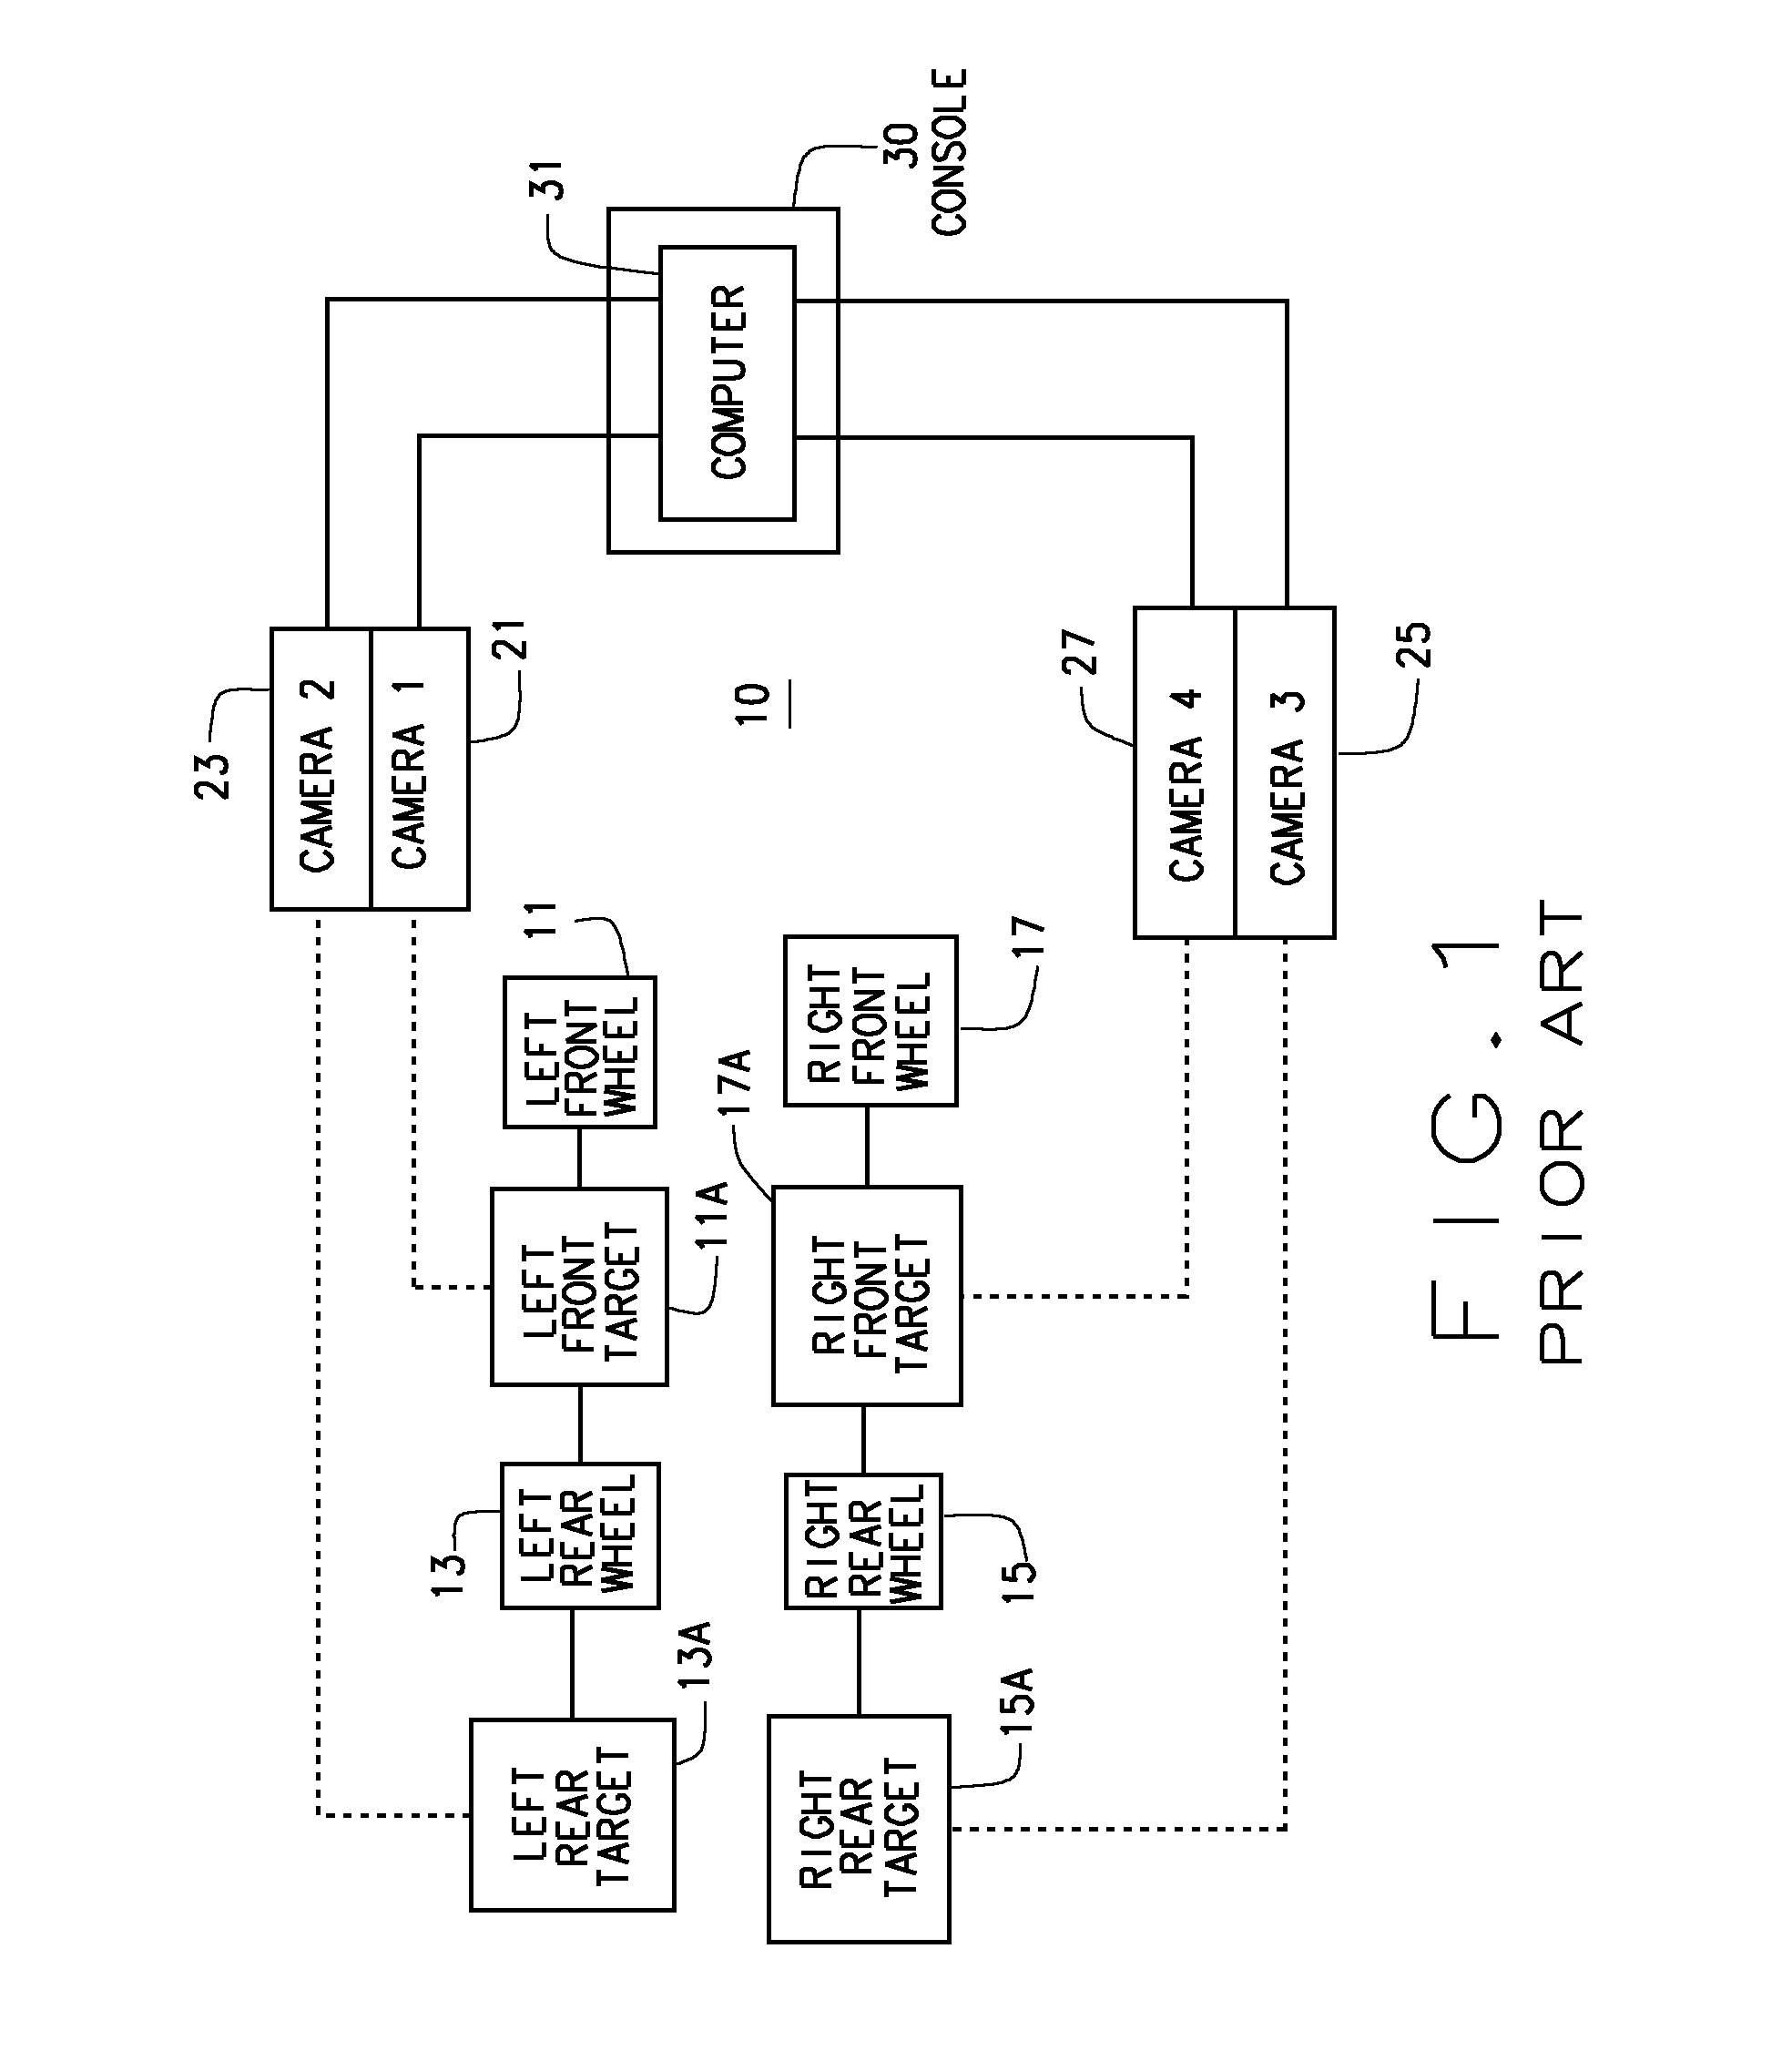 Method and apparatus for positioning a vehicle service device relative to a vehicle thrust line